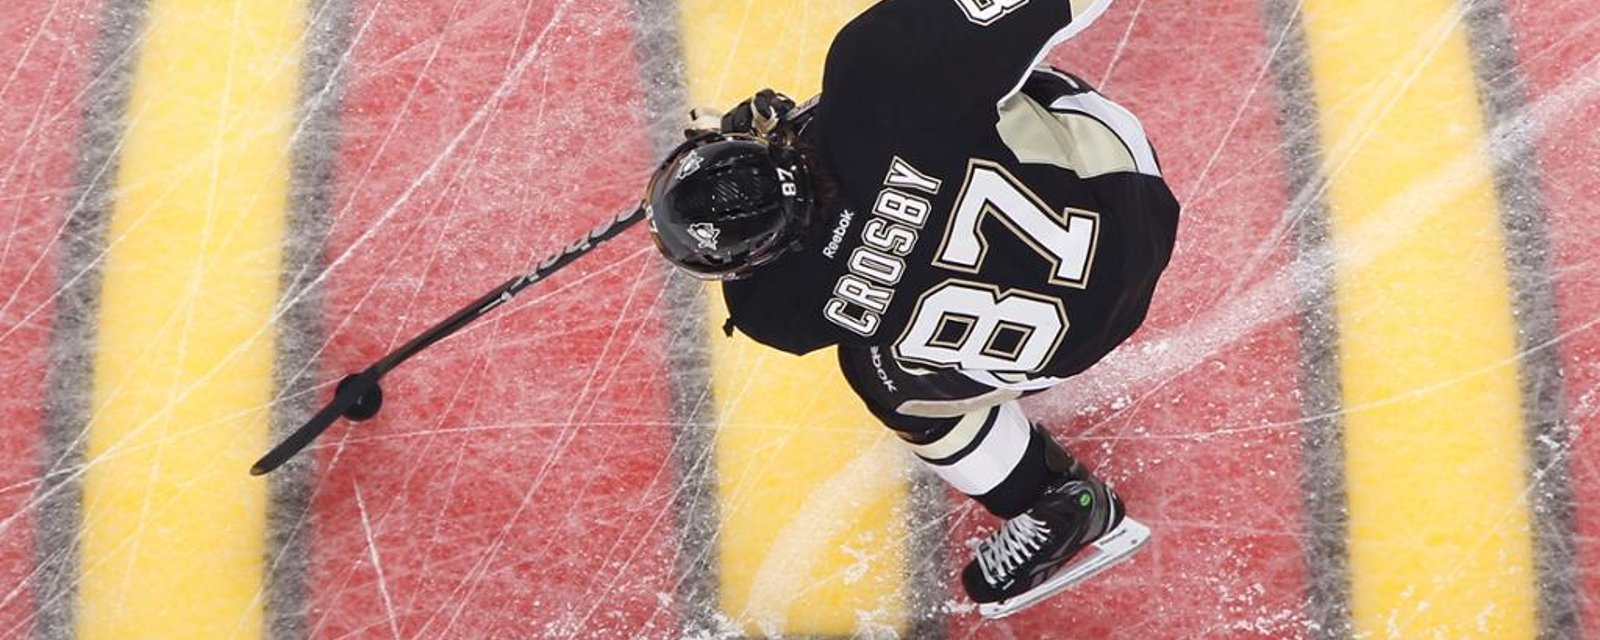 List of Crosby’s superstitions will make shake your head in dismay! 